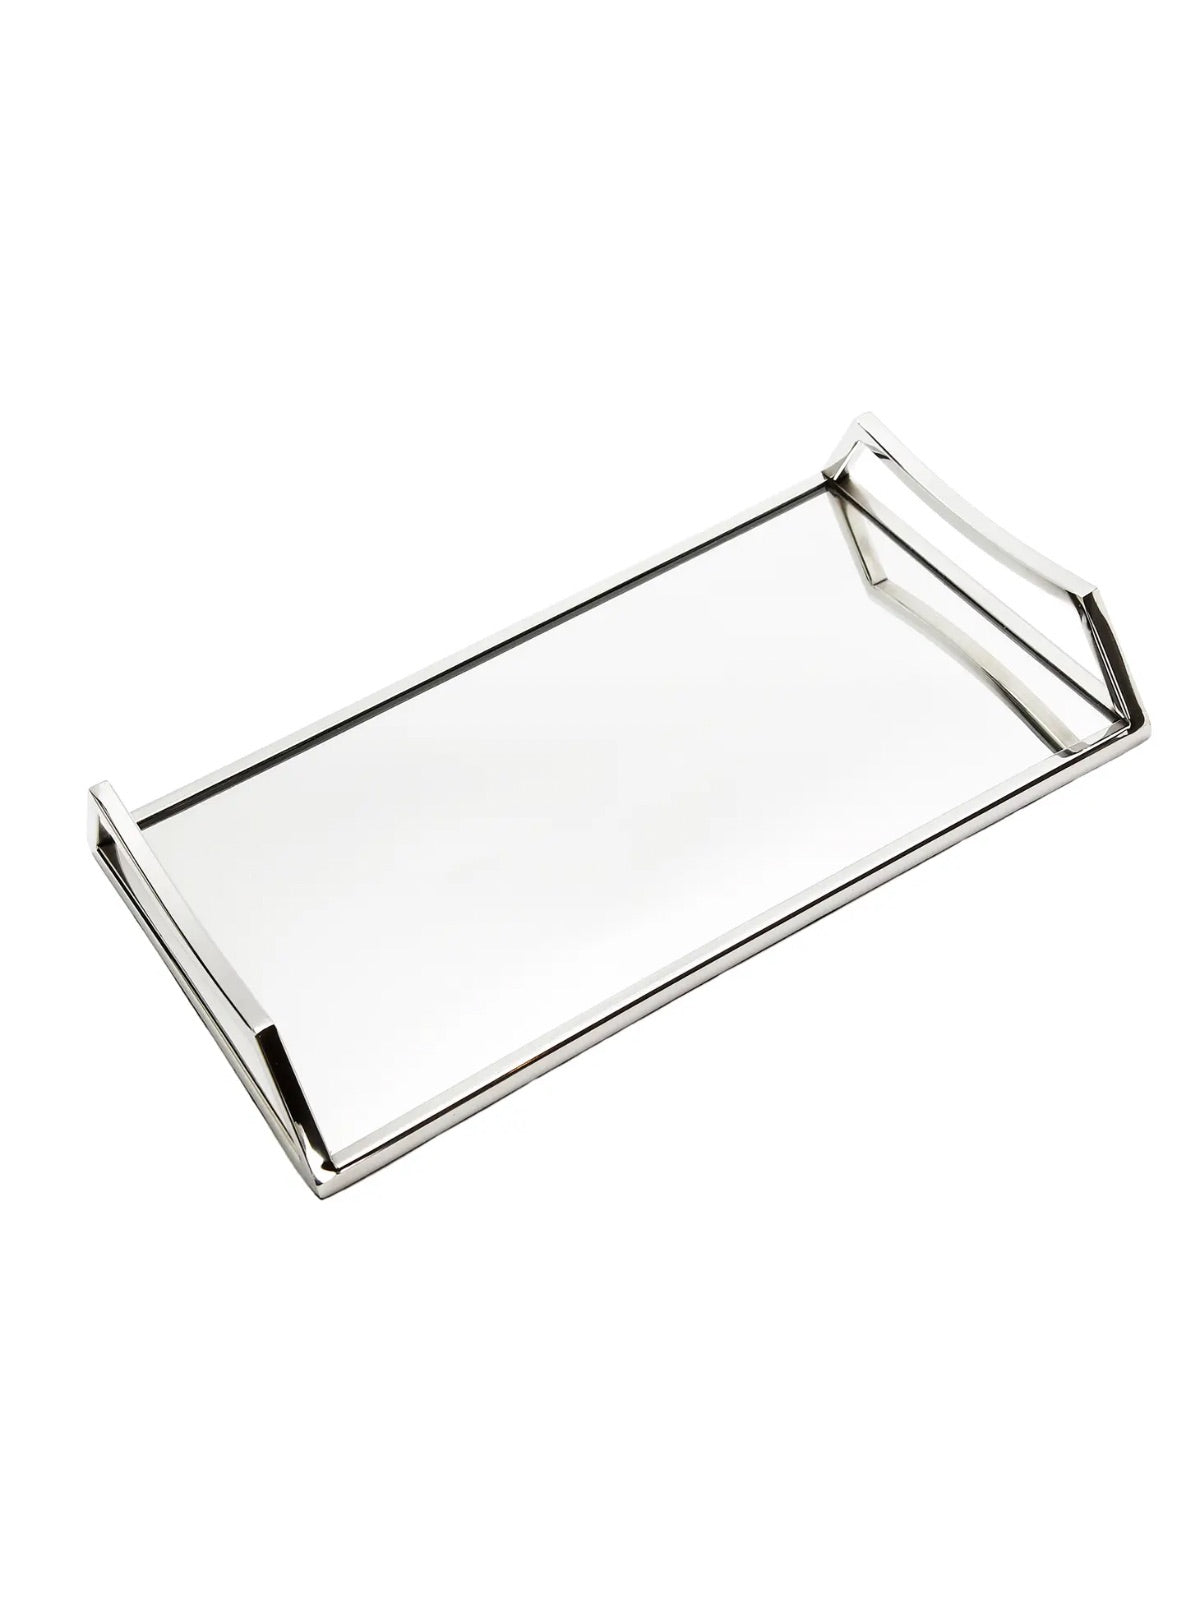 16L inches Oblong Mirror Serving Tray with Silver Handles.